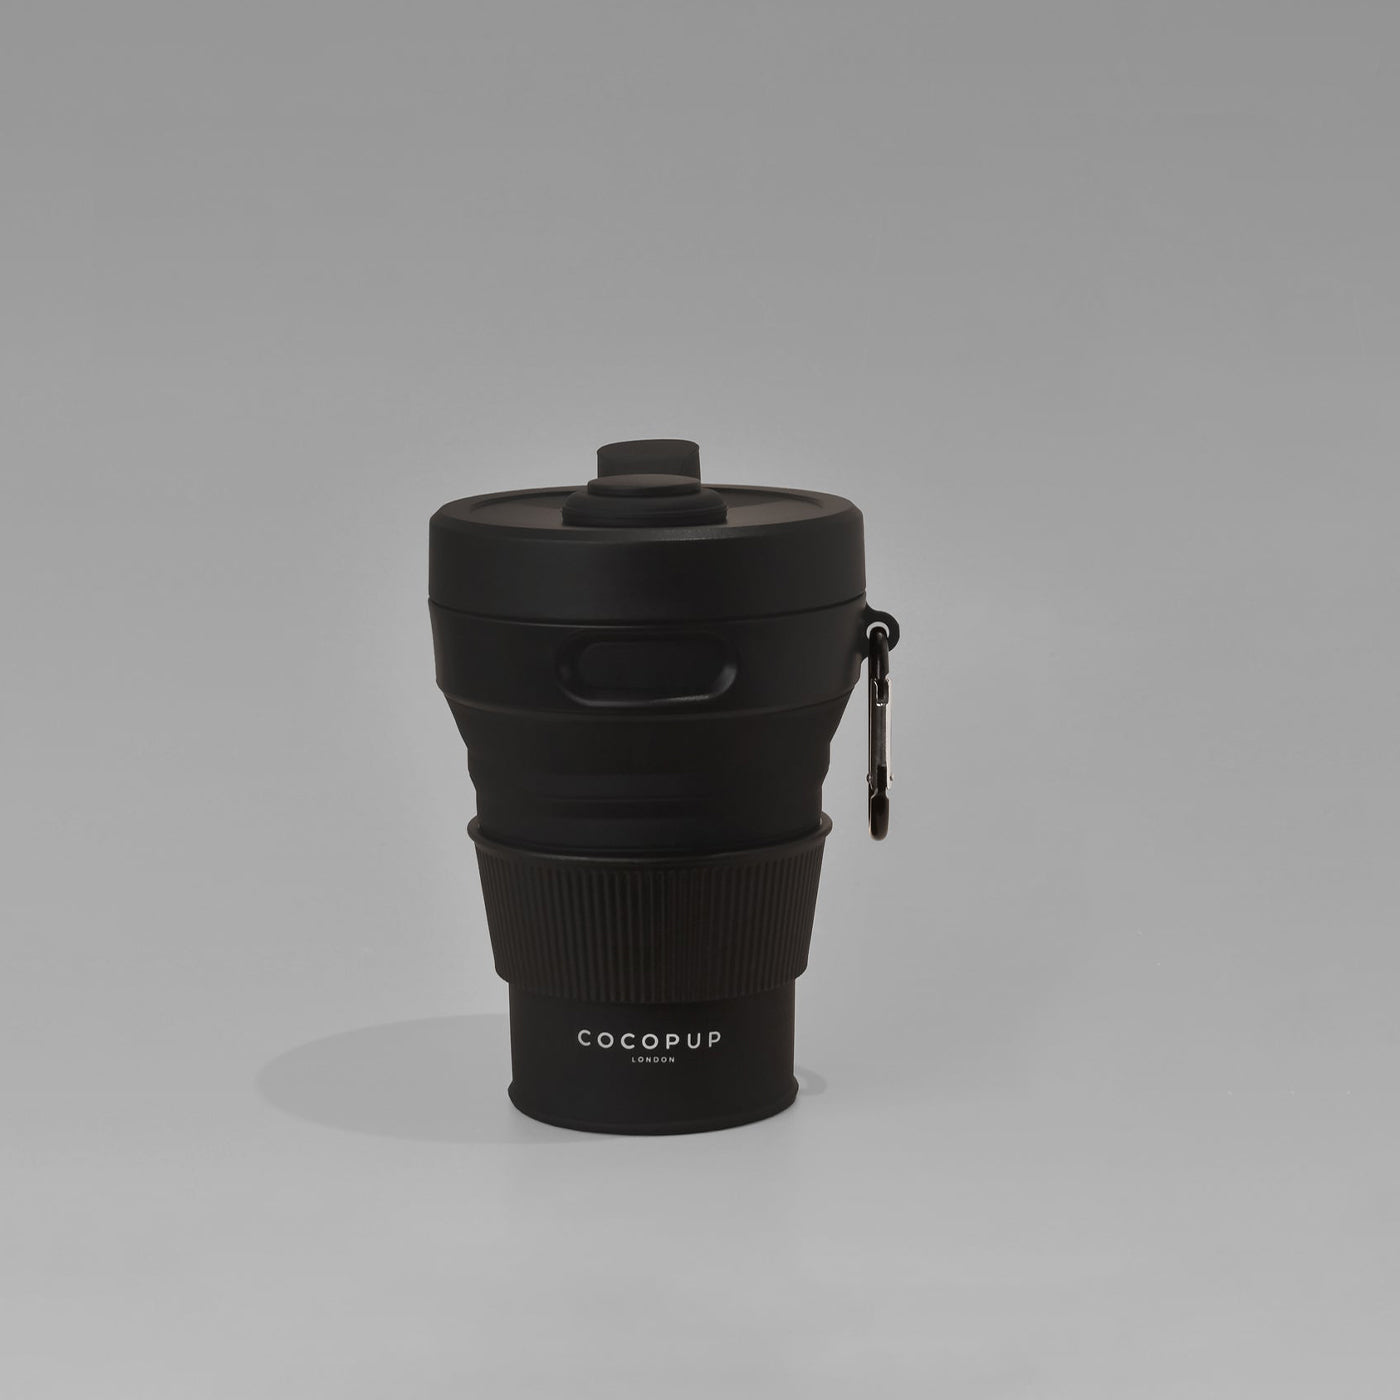 Cocopup London Black Collapsible Coffee Cup